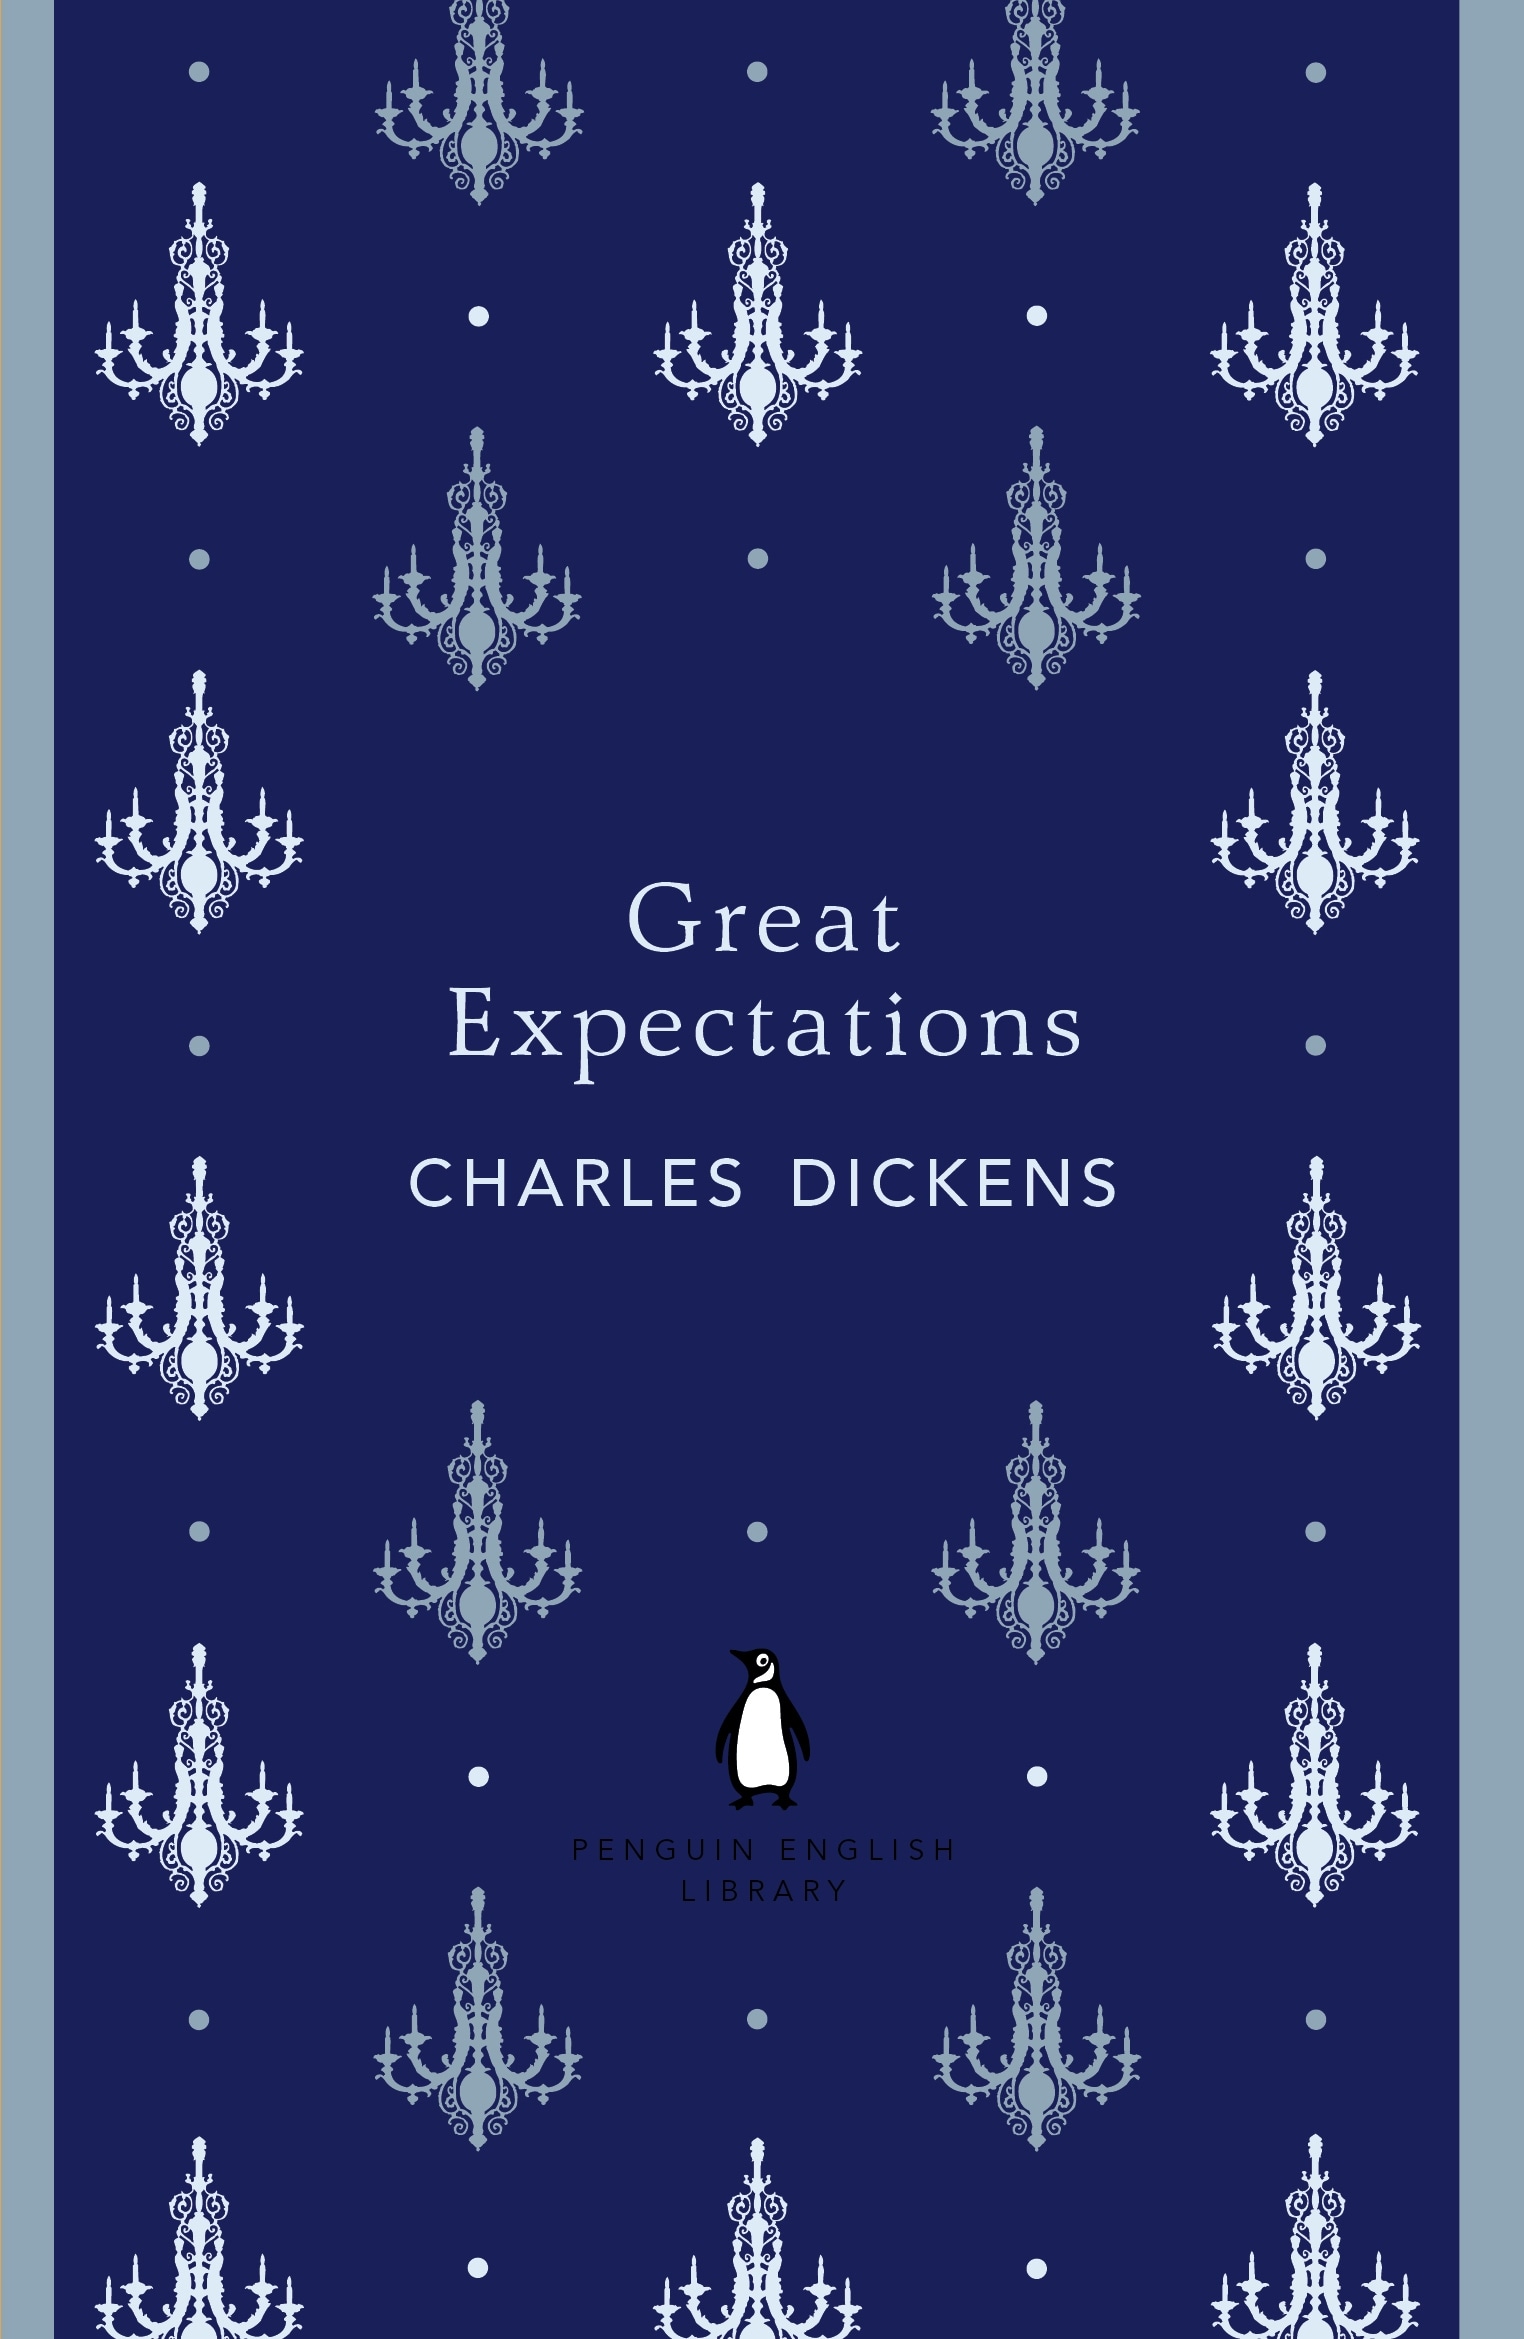 Book “Great Expectations” by Charles Dickens — April 26, 2012